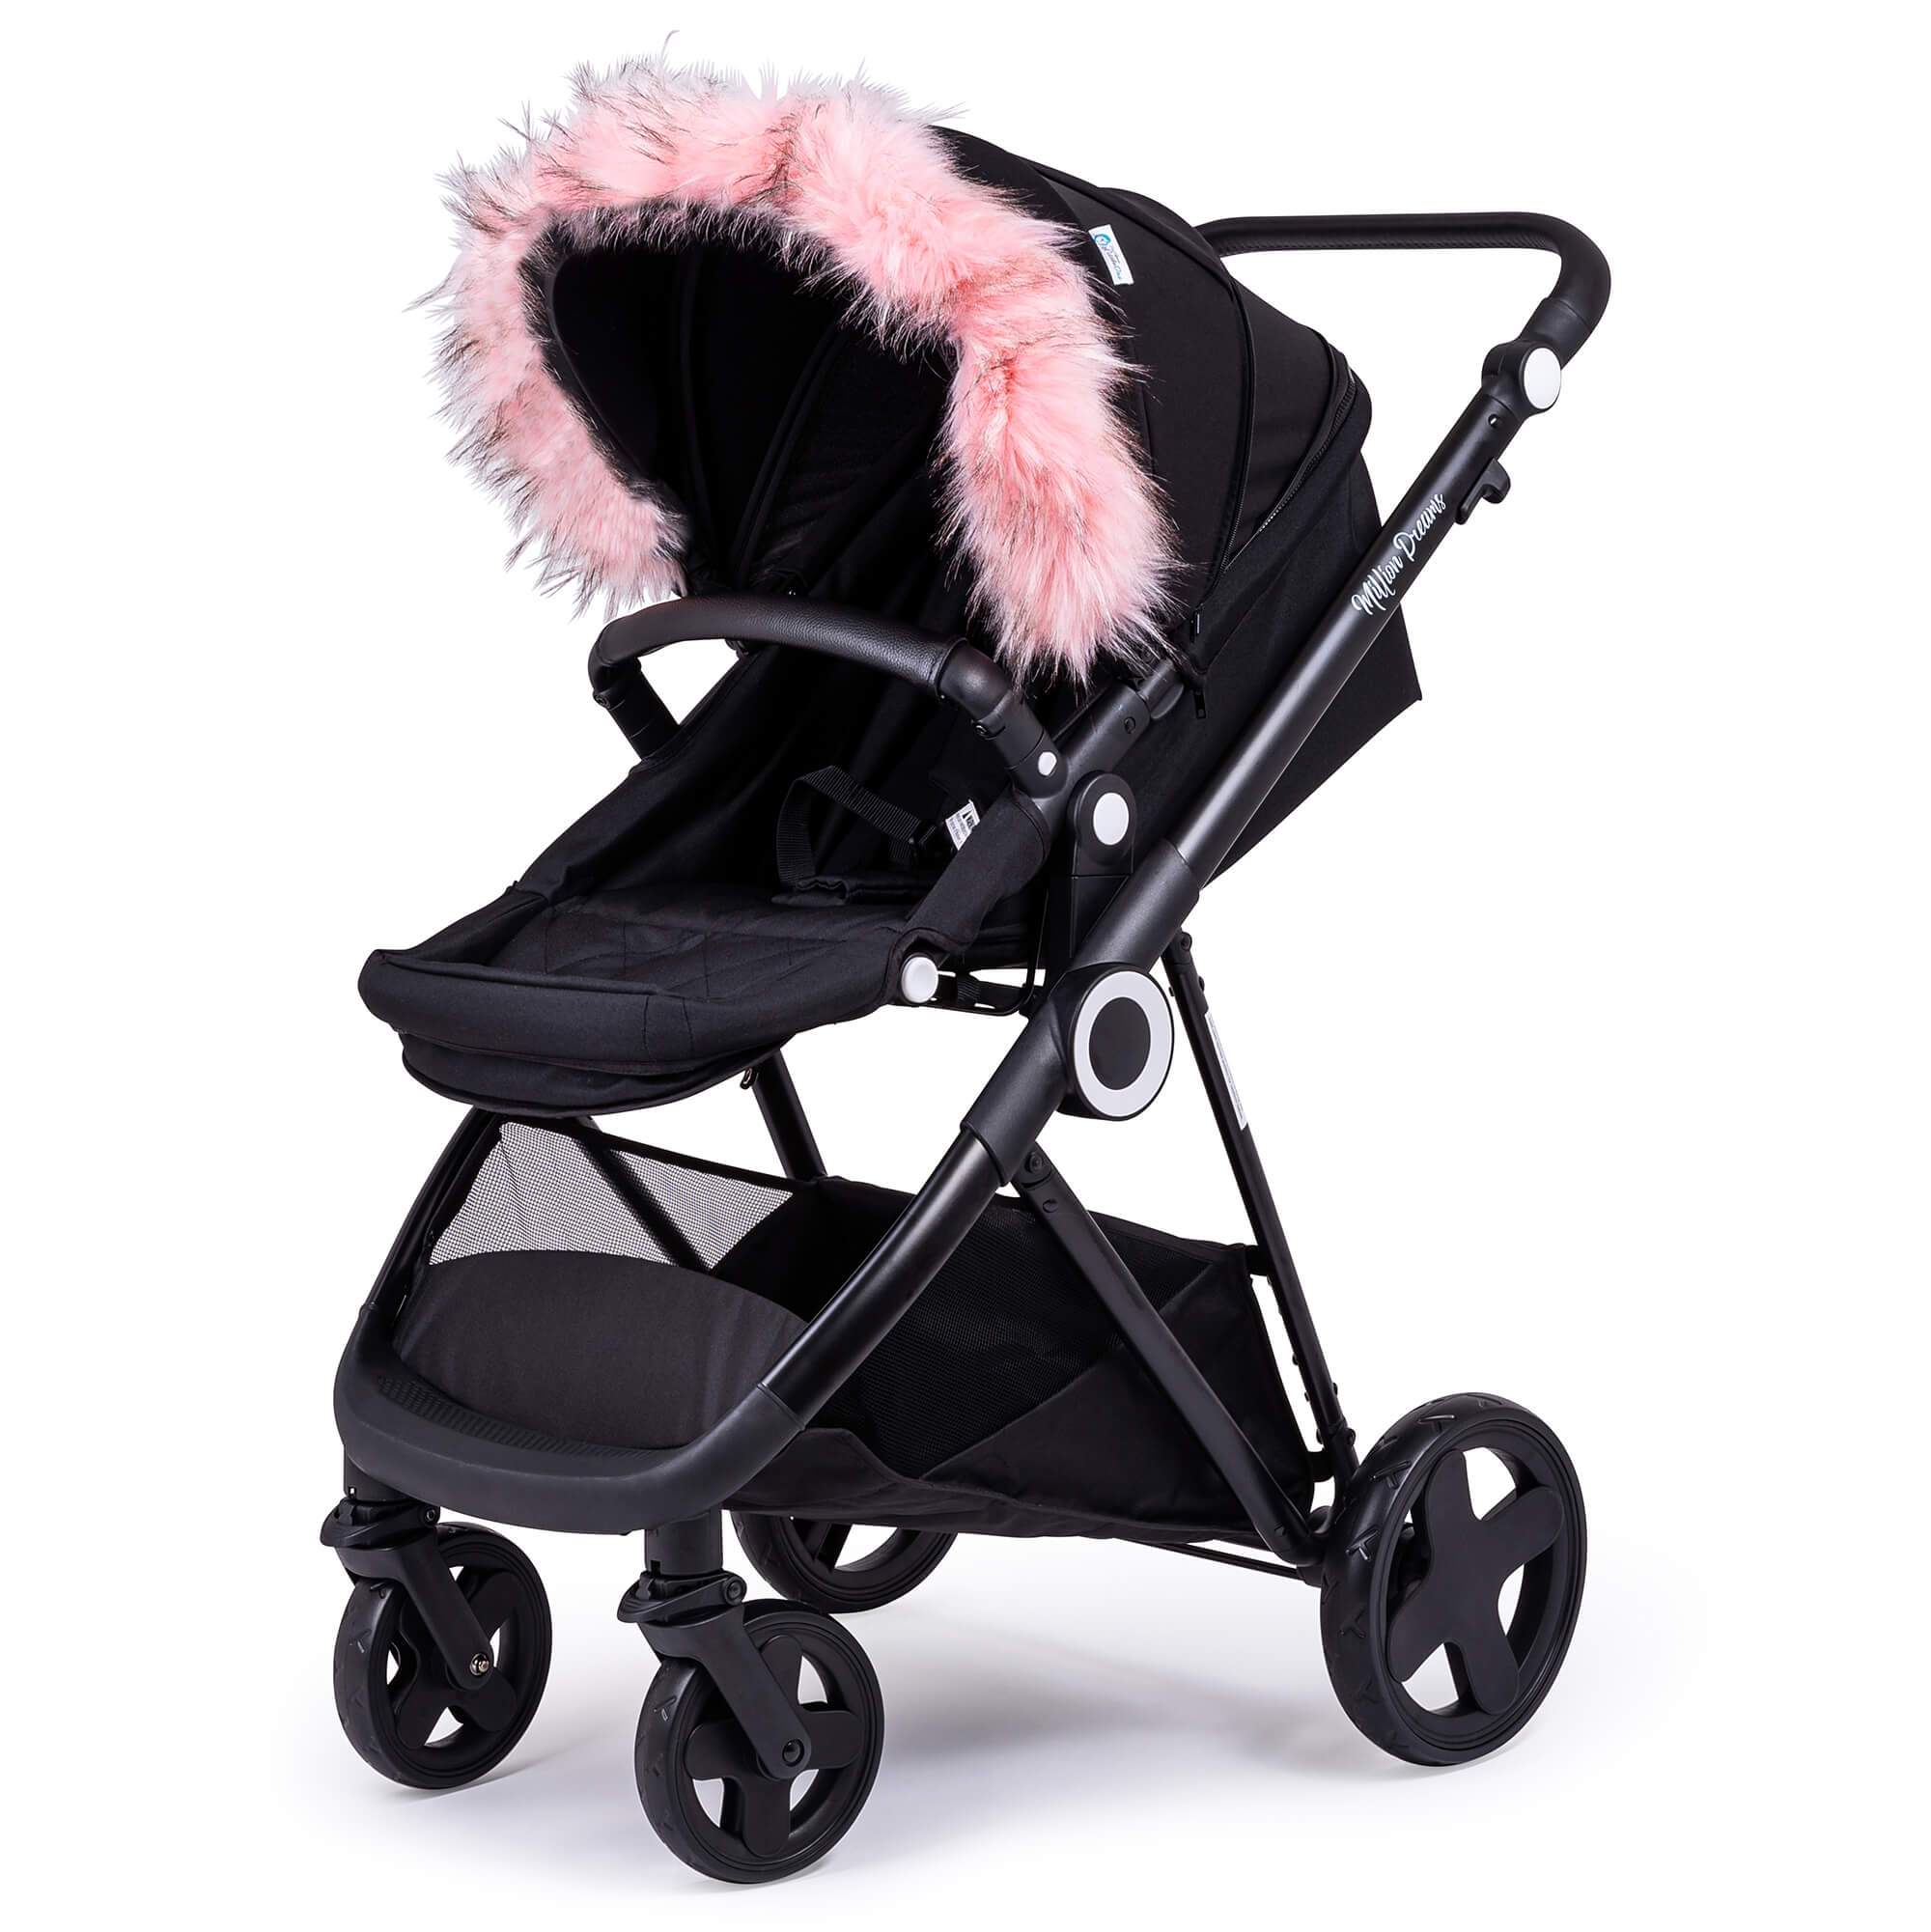 Pram Fur Hood Trim Attachment For Pushchair Compatible with Kids Kargo - Light Pink / Fits All Models | For Your Little One